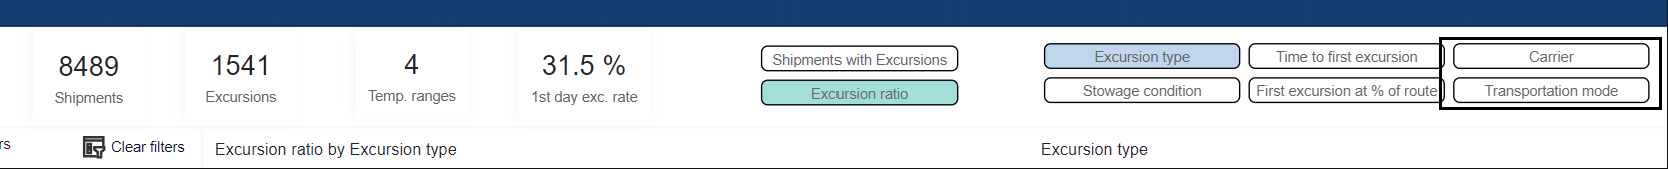 Screenshot showing how you can switch between graphs showing number of shipments with excursions by carrier/transport mode or ratio of shipments with excursions by carrier/transport mode as a percentage of all shipments